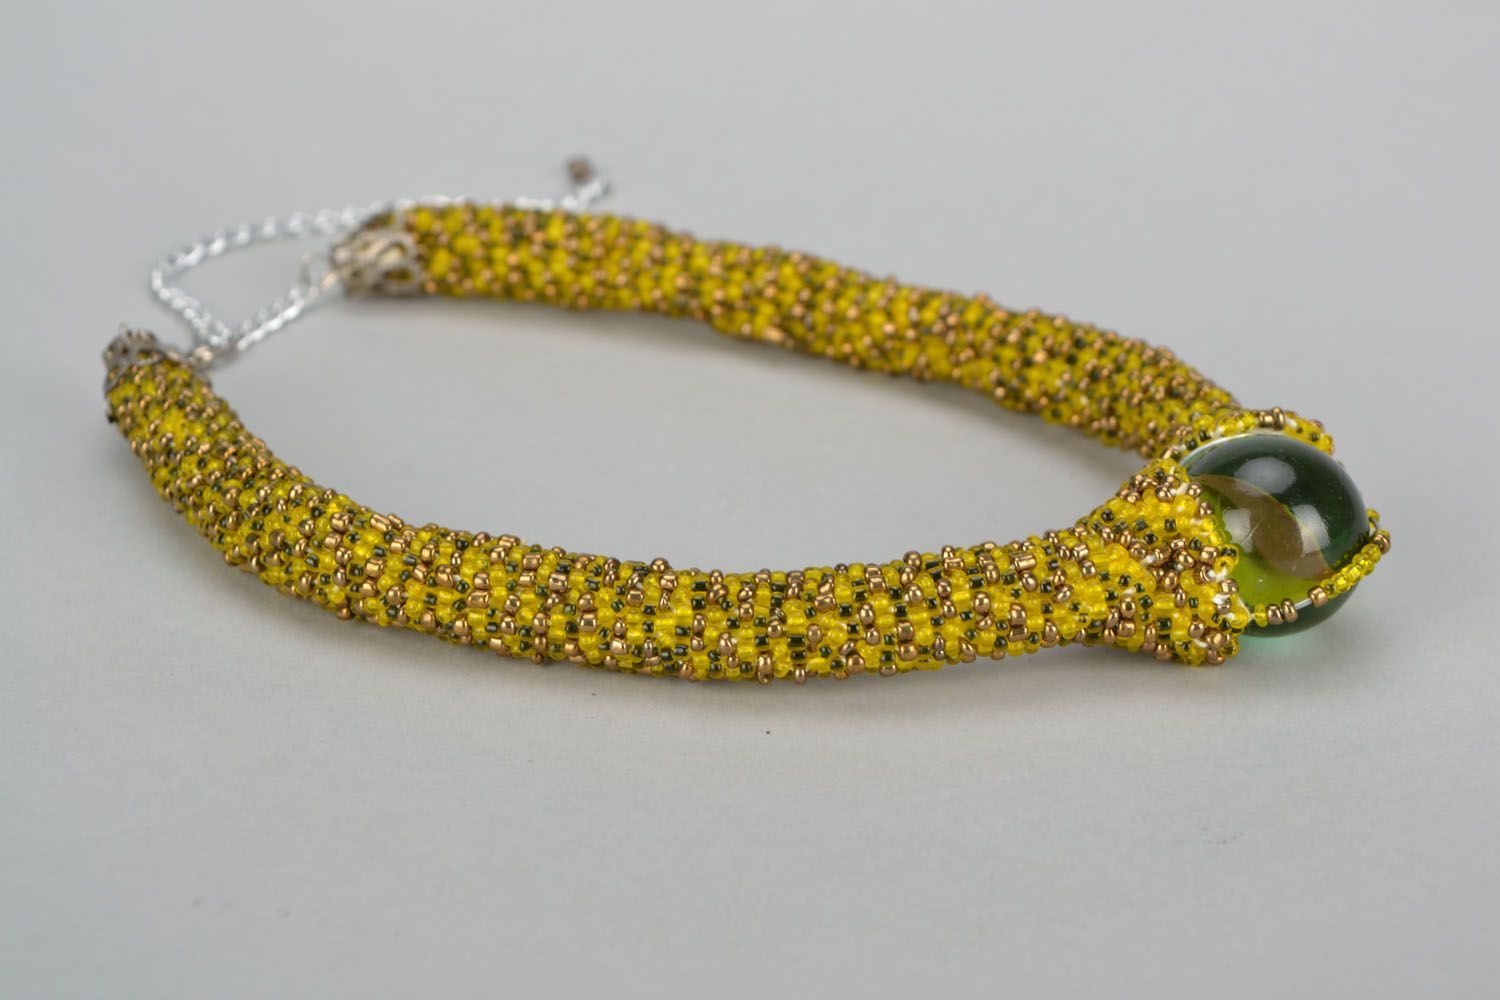 Beaded cord necklace with a glass bead photo 2